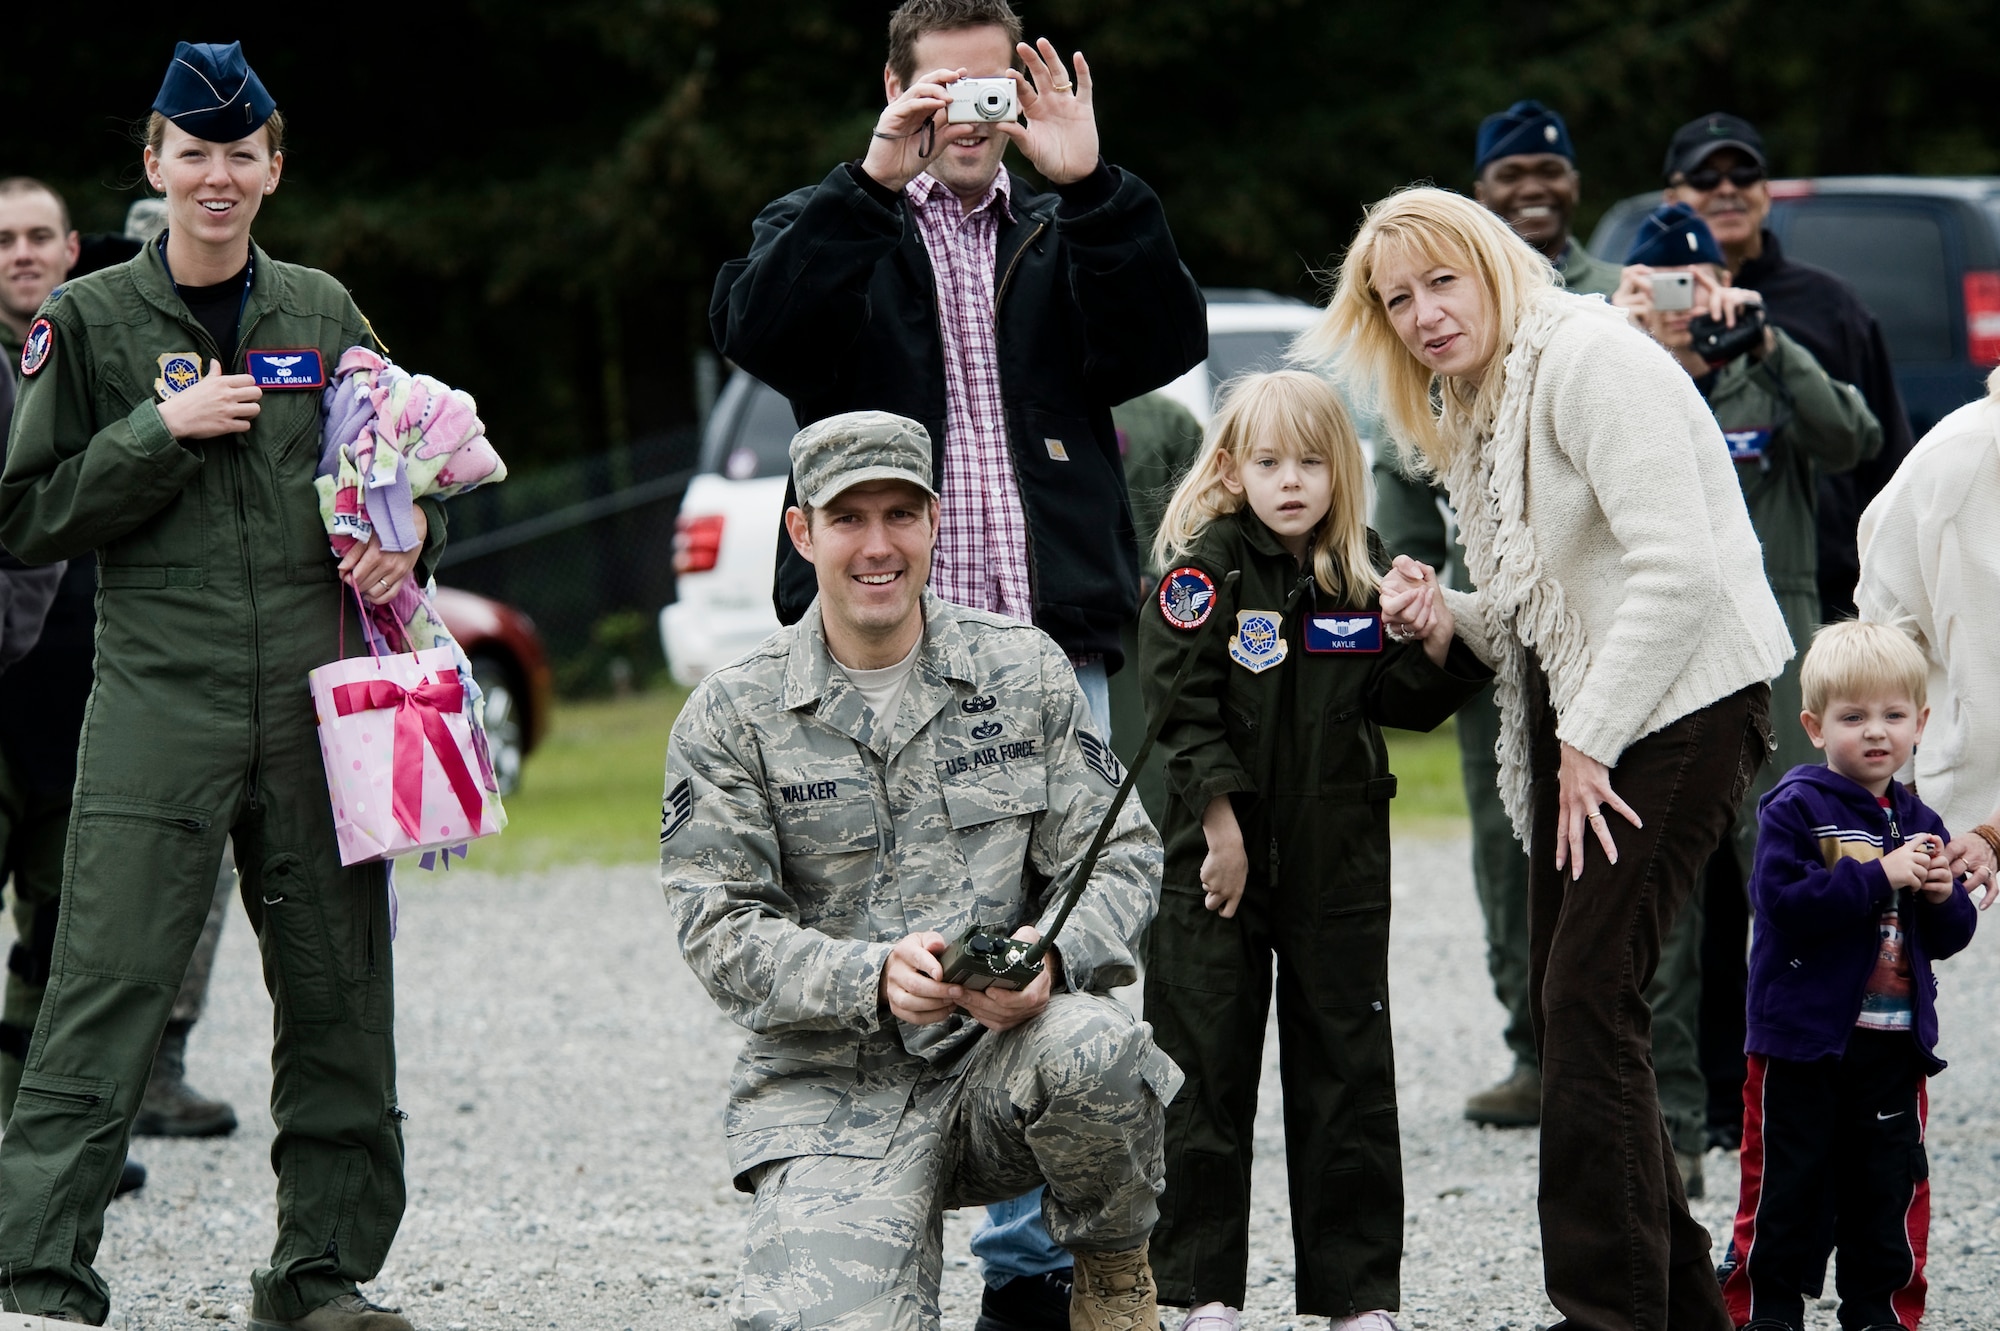 Pilot for a Day candidate Kaylie Bergen, age 6, and her family look on as Staff Sgt. Mark Walker, 62nd Civil Engineer Squadron, detonates an explosive as part of an EOD demonstration May 11. (U.S. Air Force Photo by Abner Guzman)

